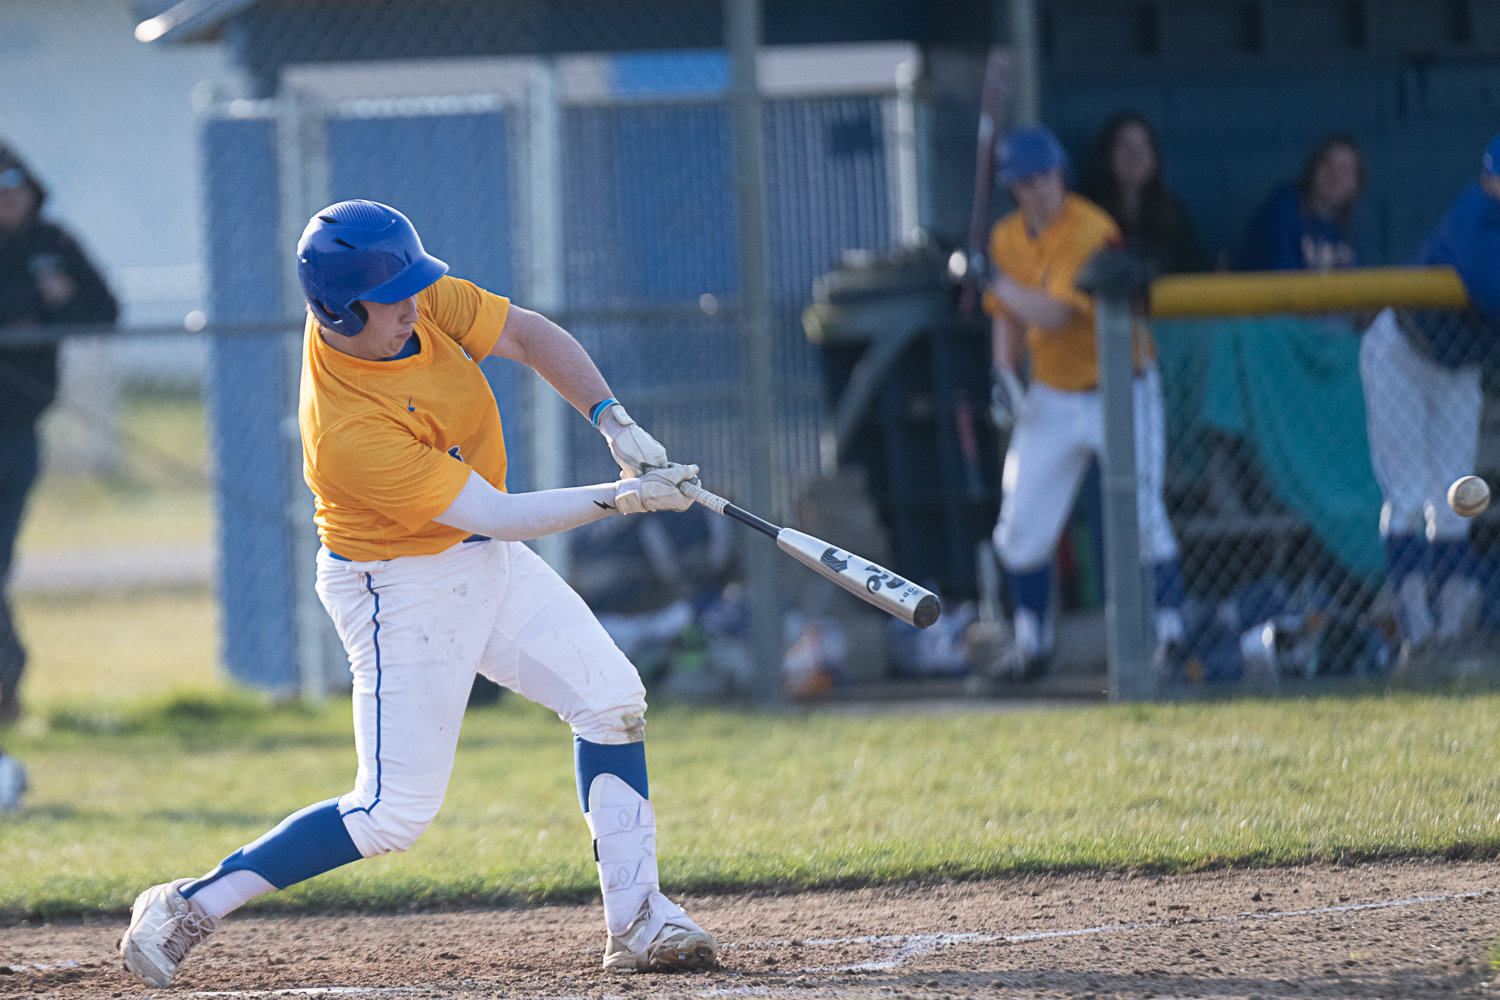 Hayden Pietras laces a ball into left field during Rochester's 15-6 win over R.A. Long on March 16.